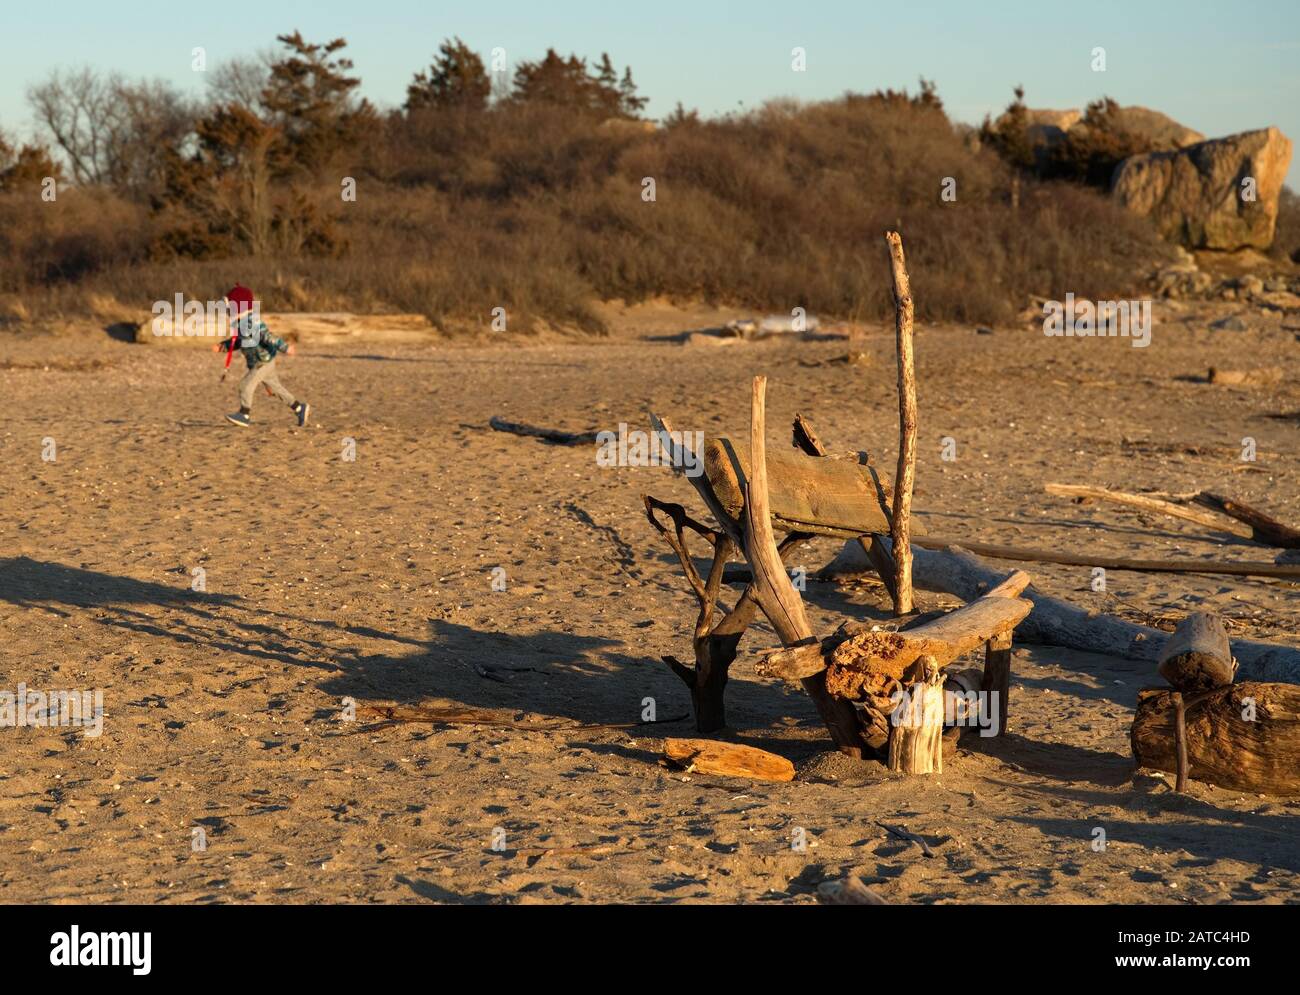 Crude bench made out of washed up logs and driftwood on New England beach with kid in background playing. Stock Photo